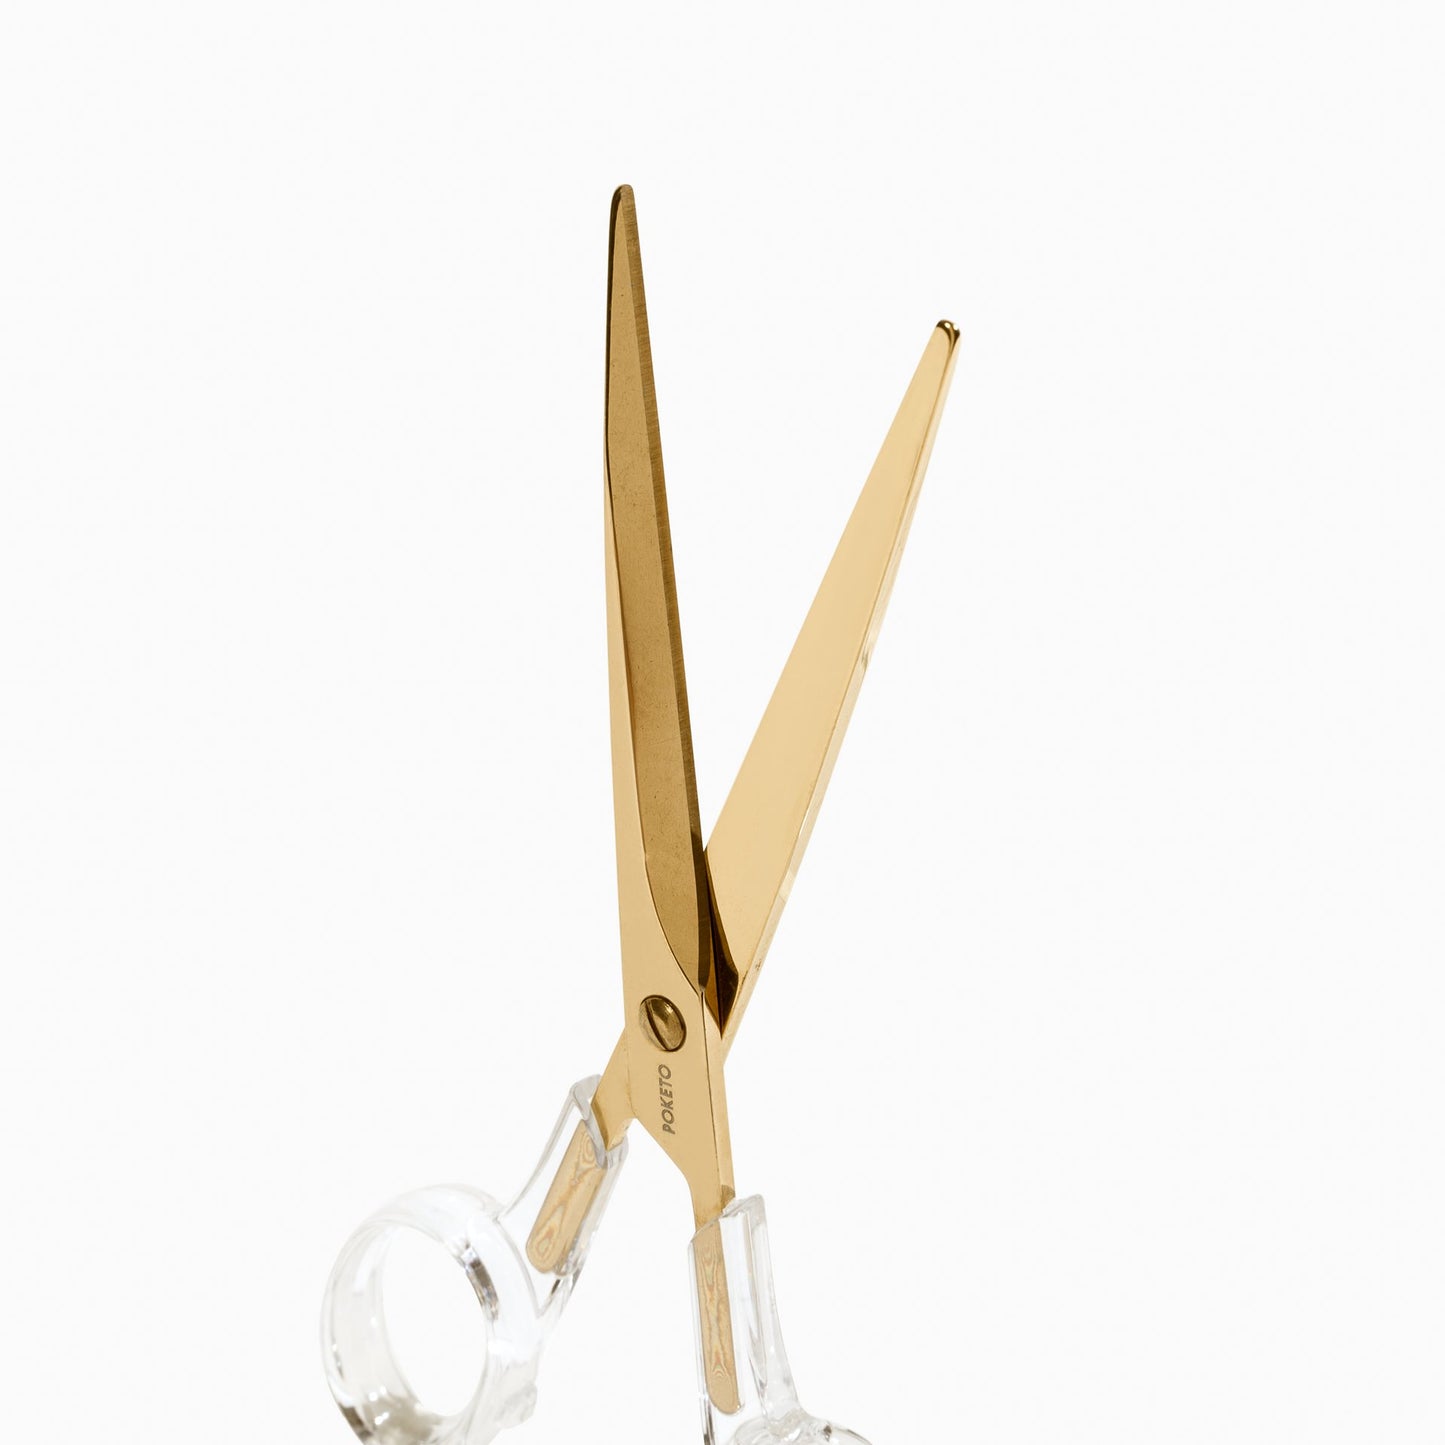 Poketo lucite Scissors in Gold detail. Available at Easy Tiger Toronto.